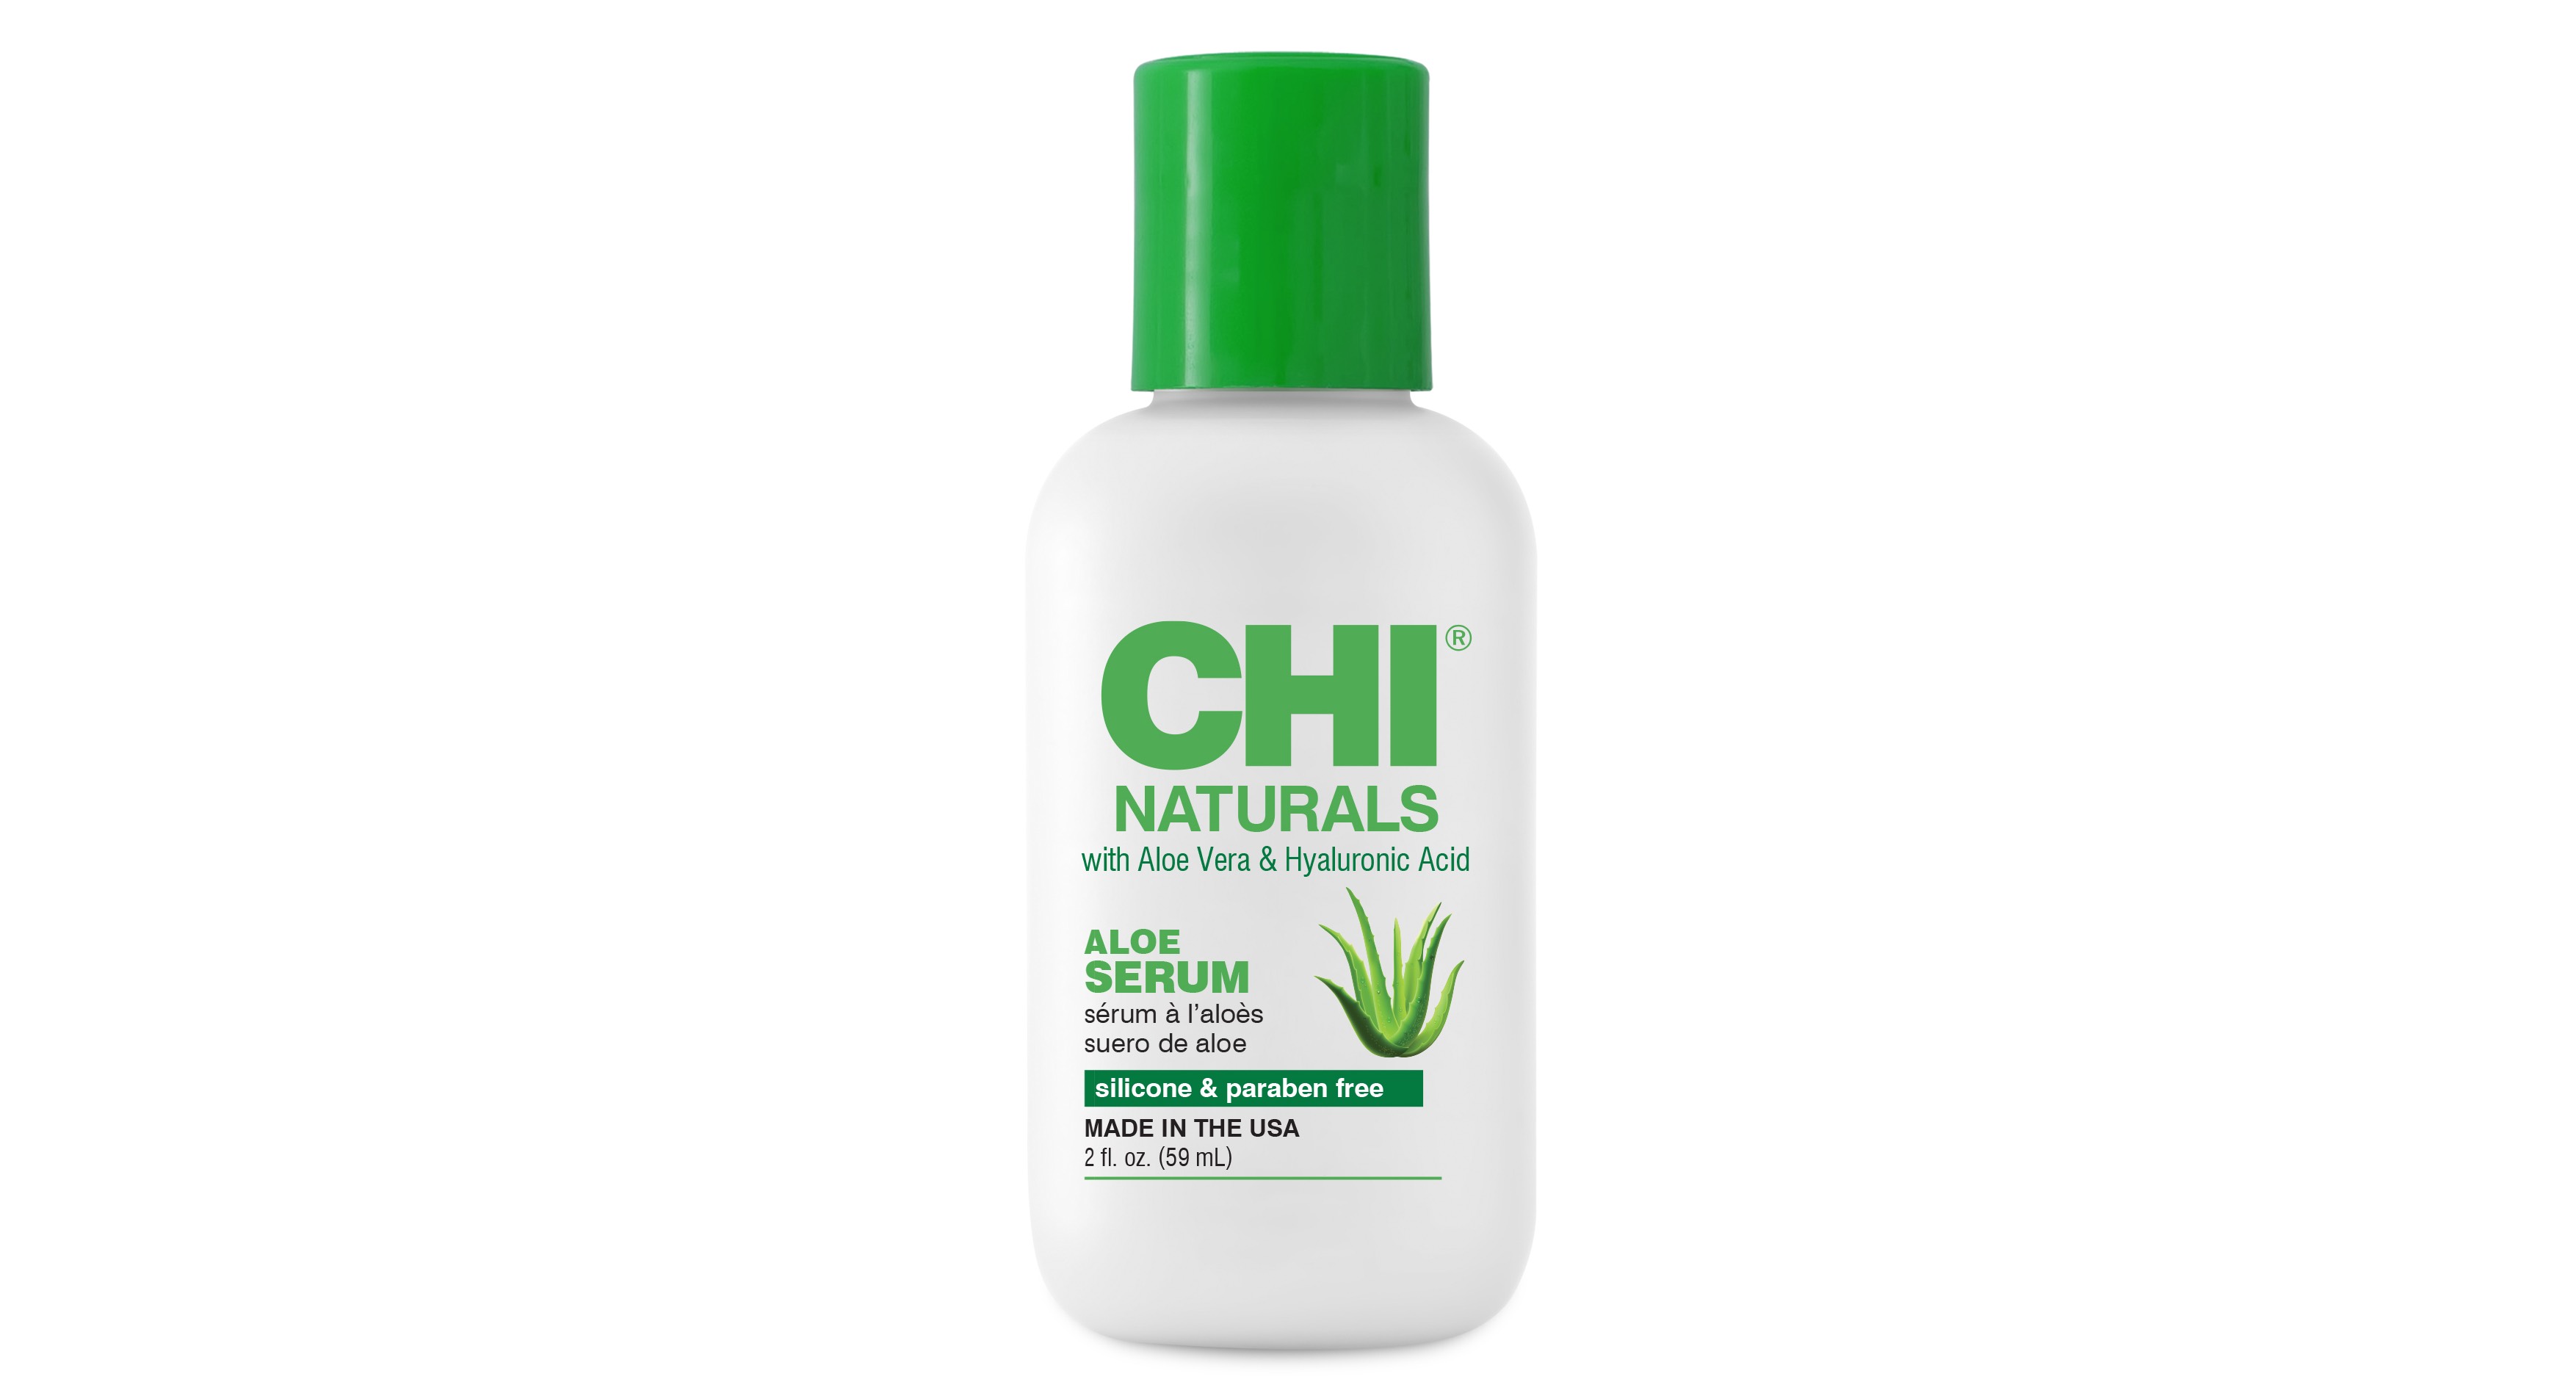 CHI Haircare Launches CHI Naturals with Aloe Vera, Hyaluronic Acid 